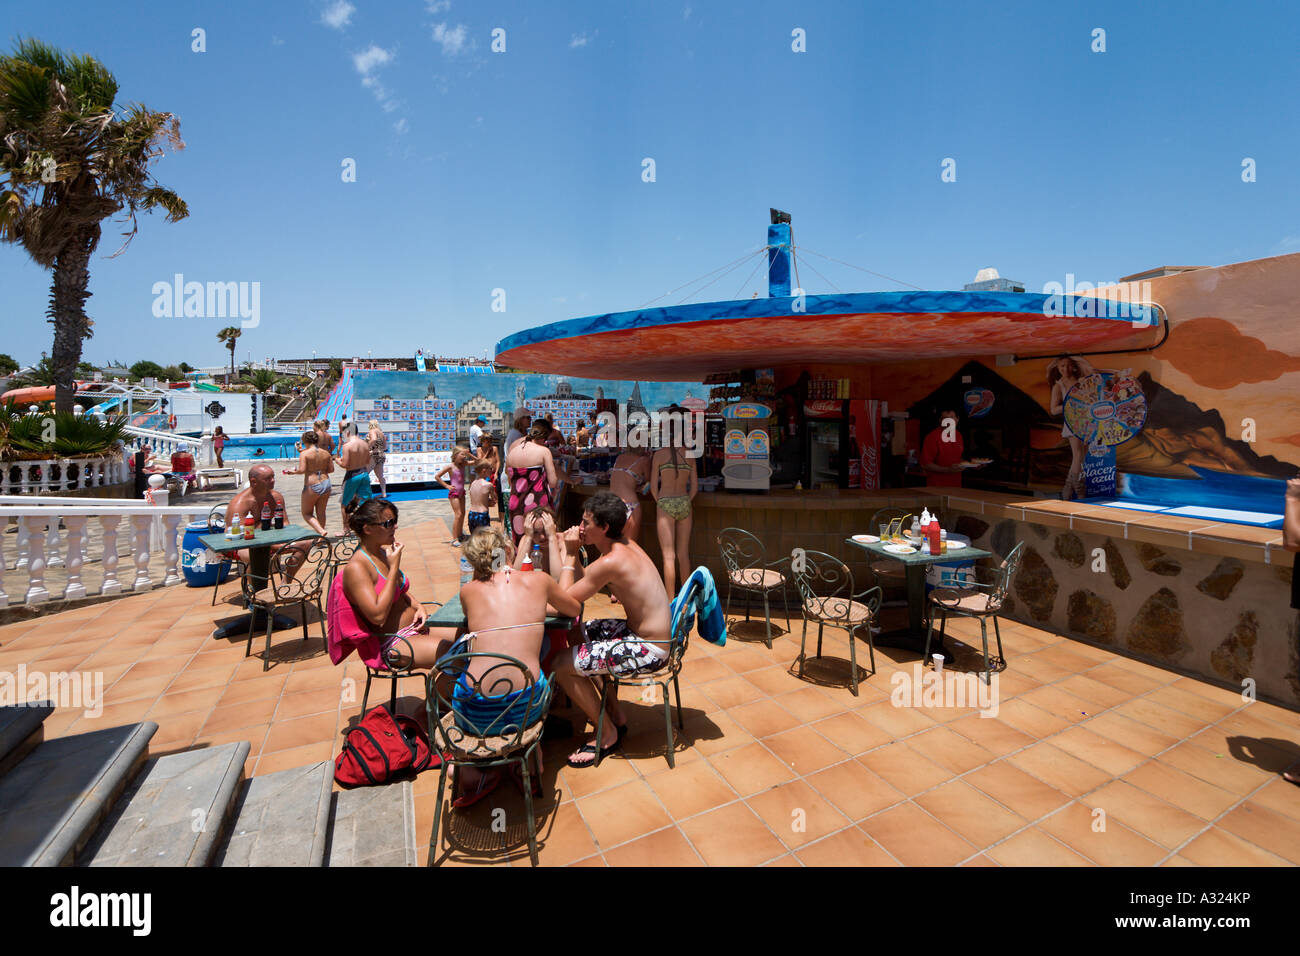 Cafeteria at the Aquapark in Costa Teguise, Lanzarote, Canary Islands, Spain Stock Photo